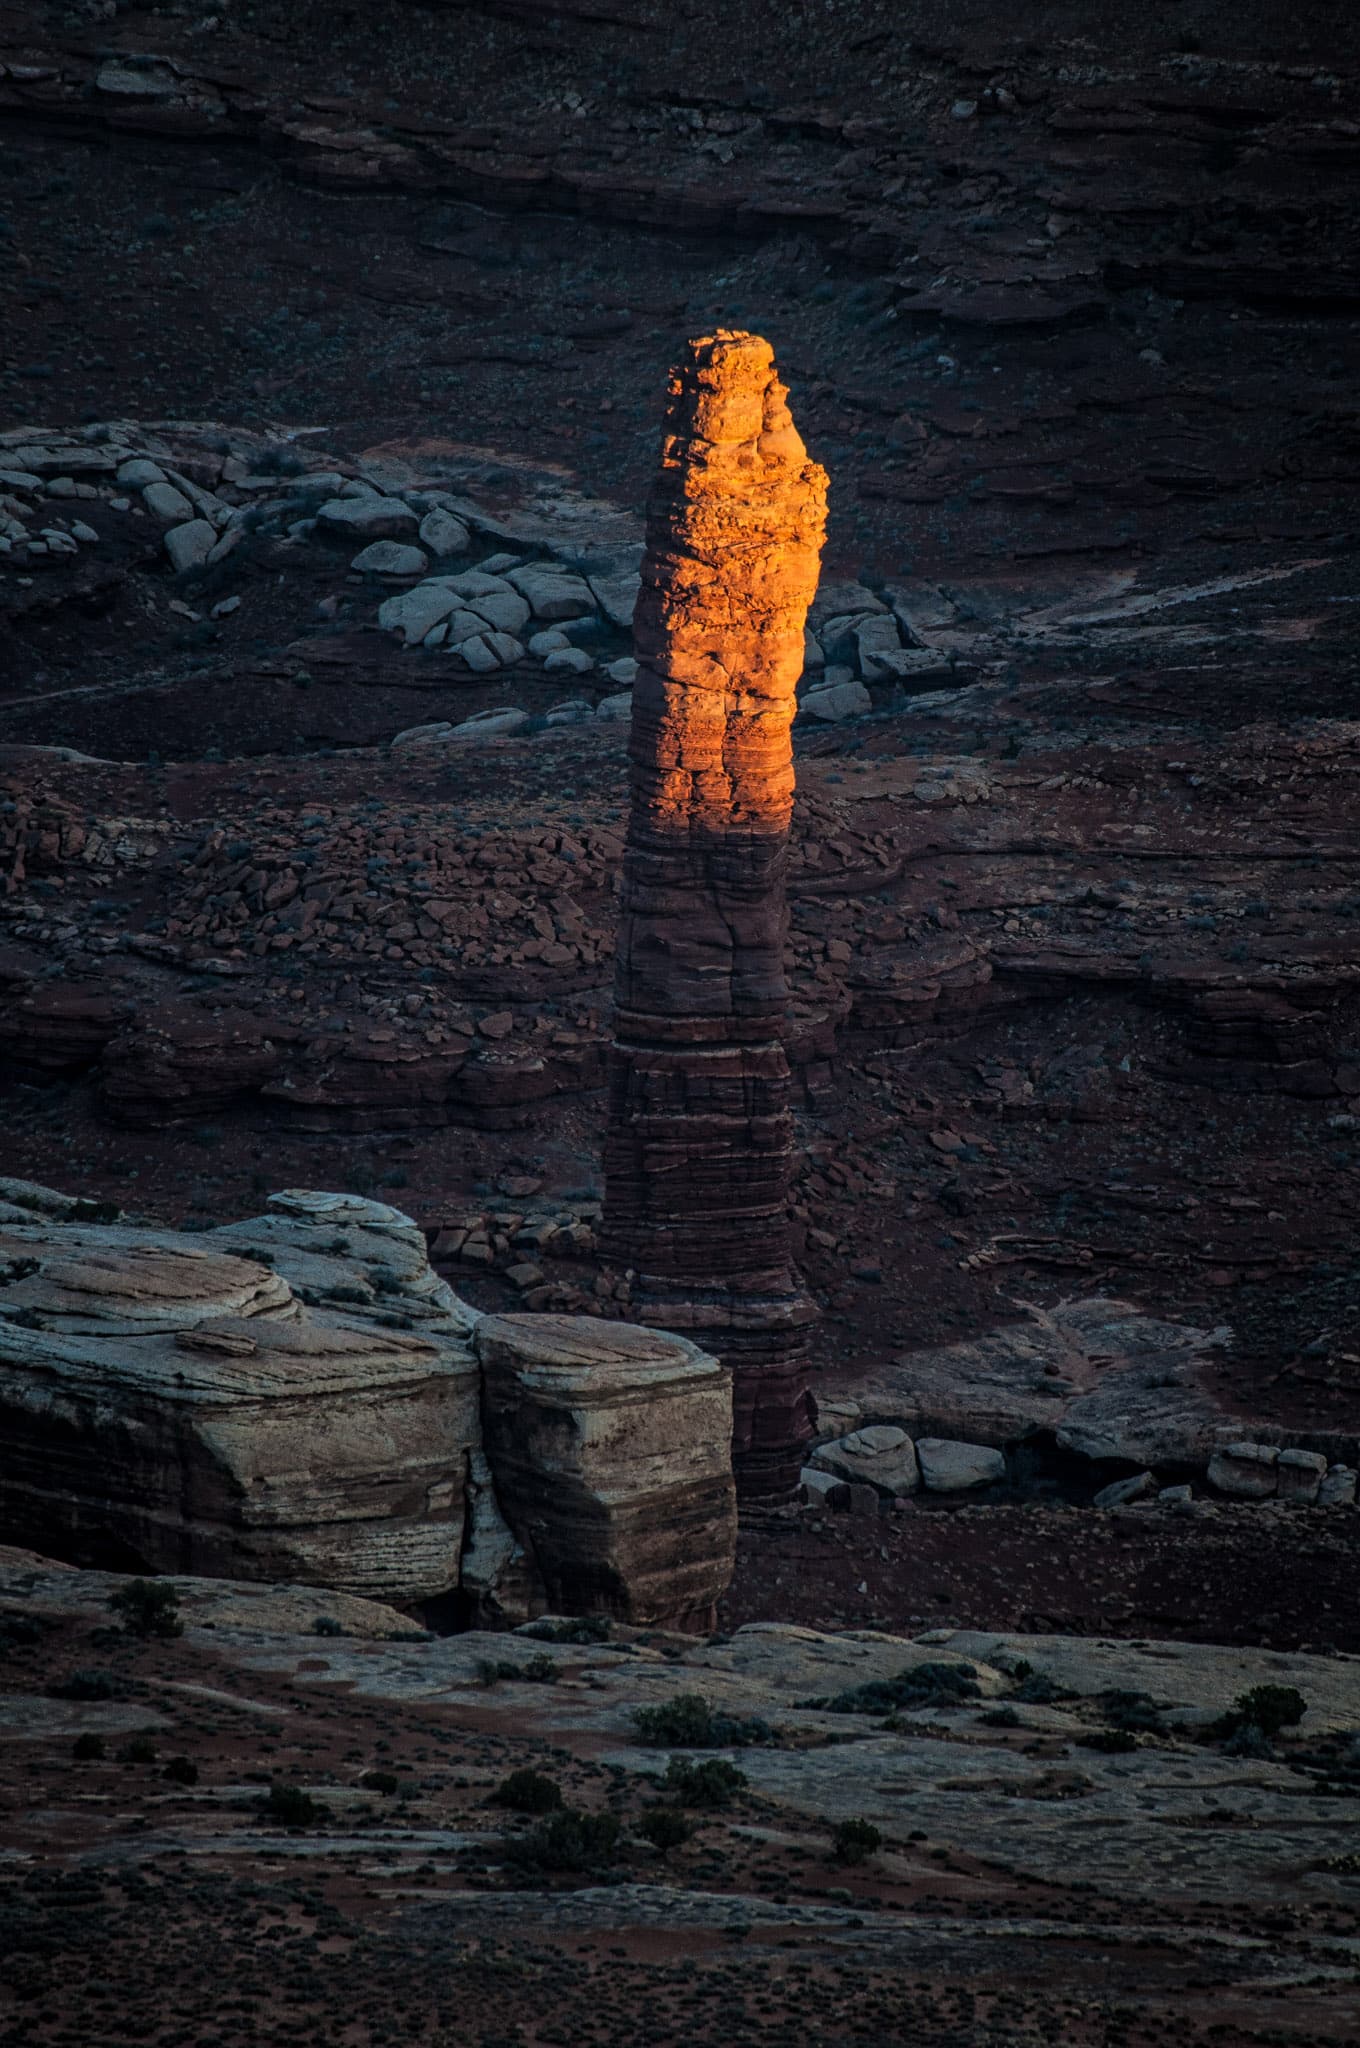 Last light of day below the rim in Canyonlands National Park.